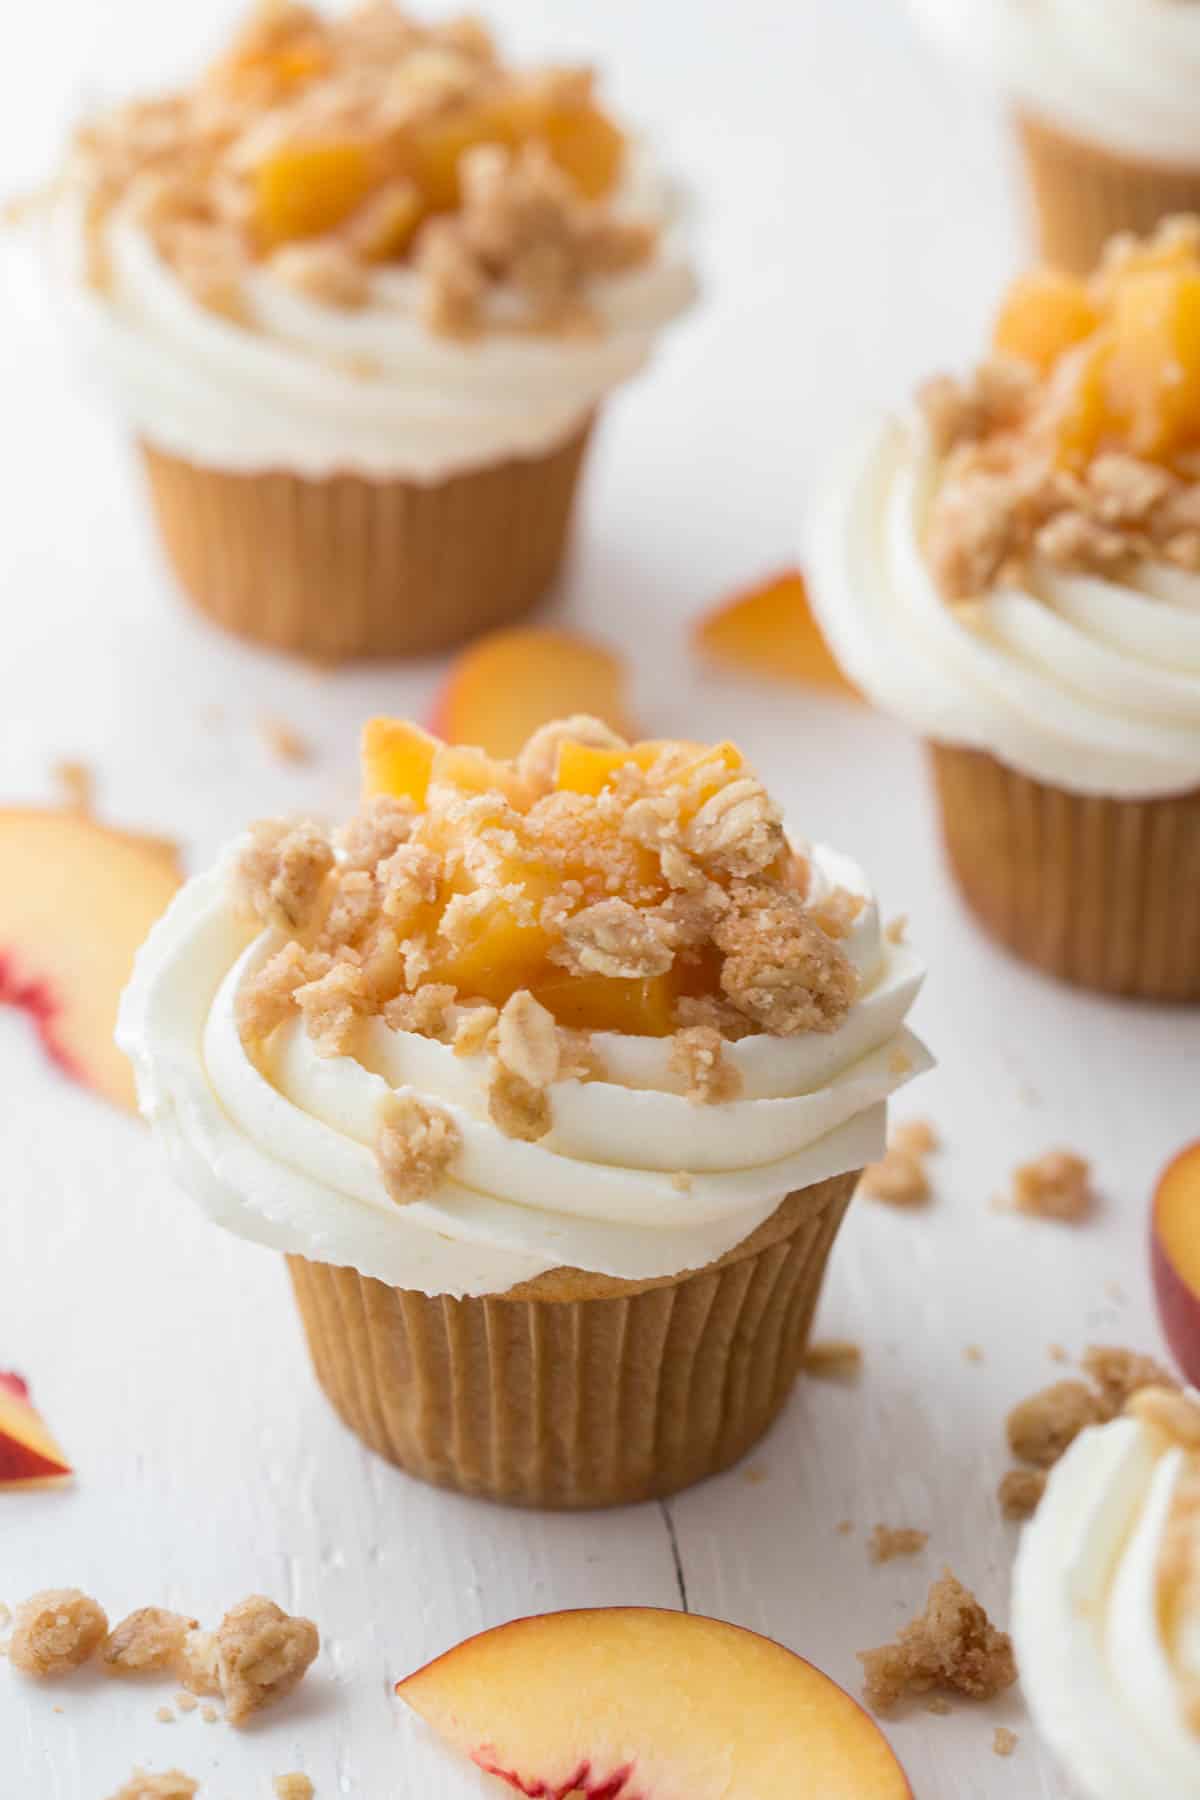 A few peach cupcakes on a white tabletop ready to be served.